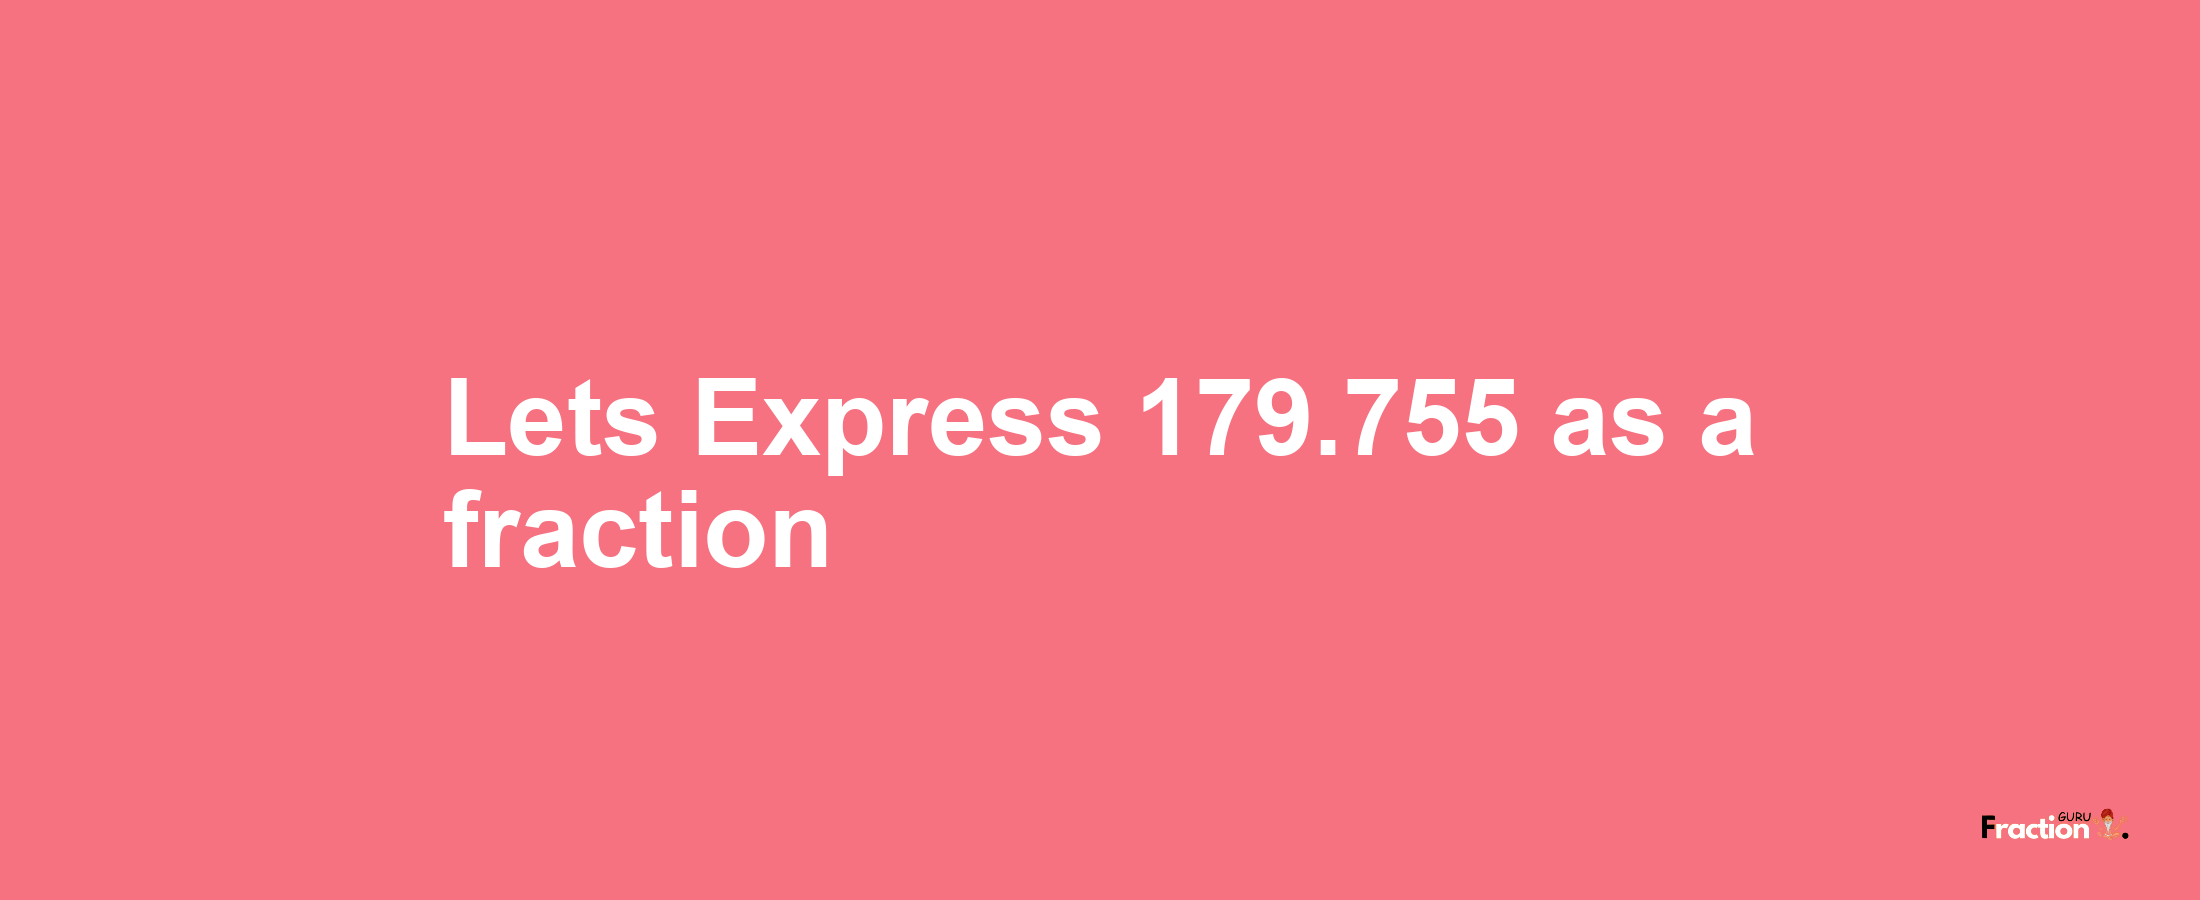 Lets Express 179.755 as afraction